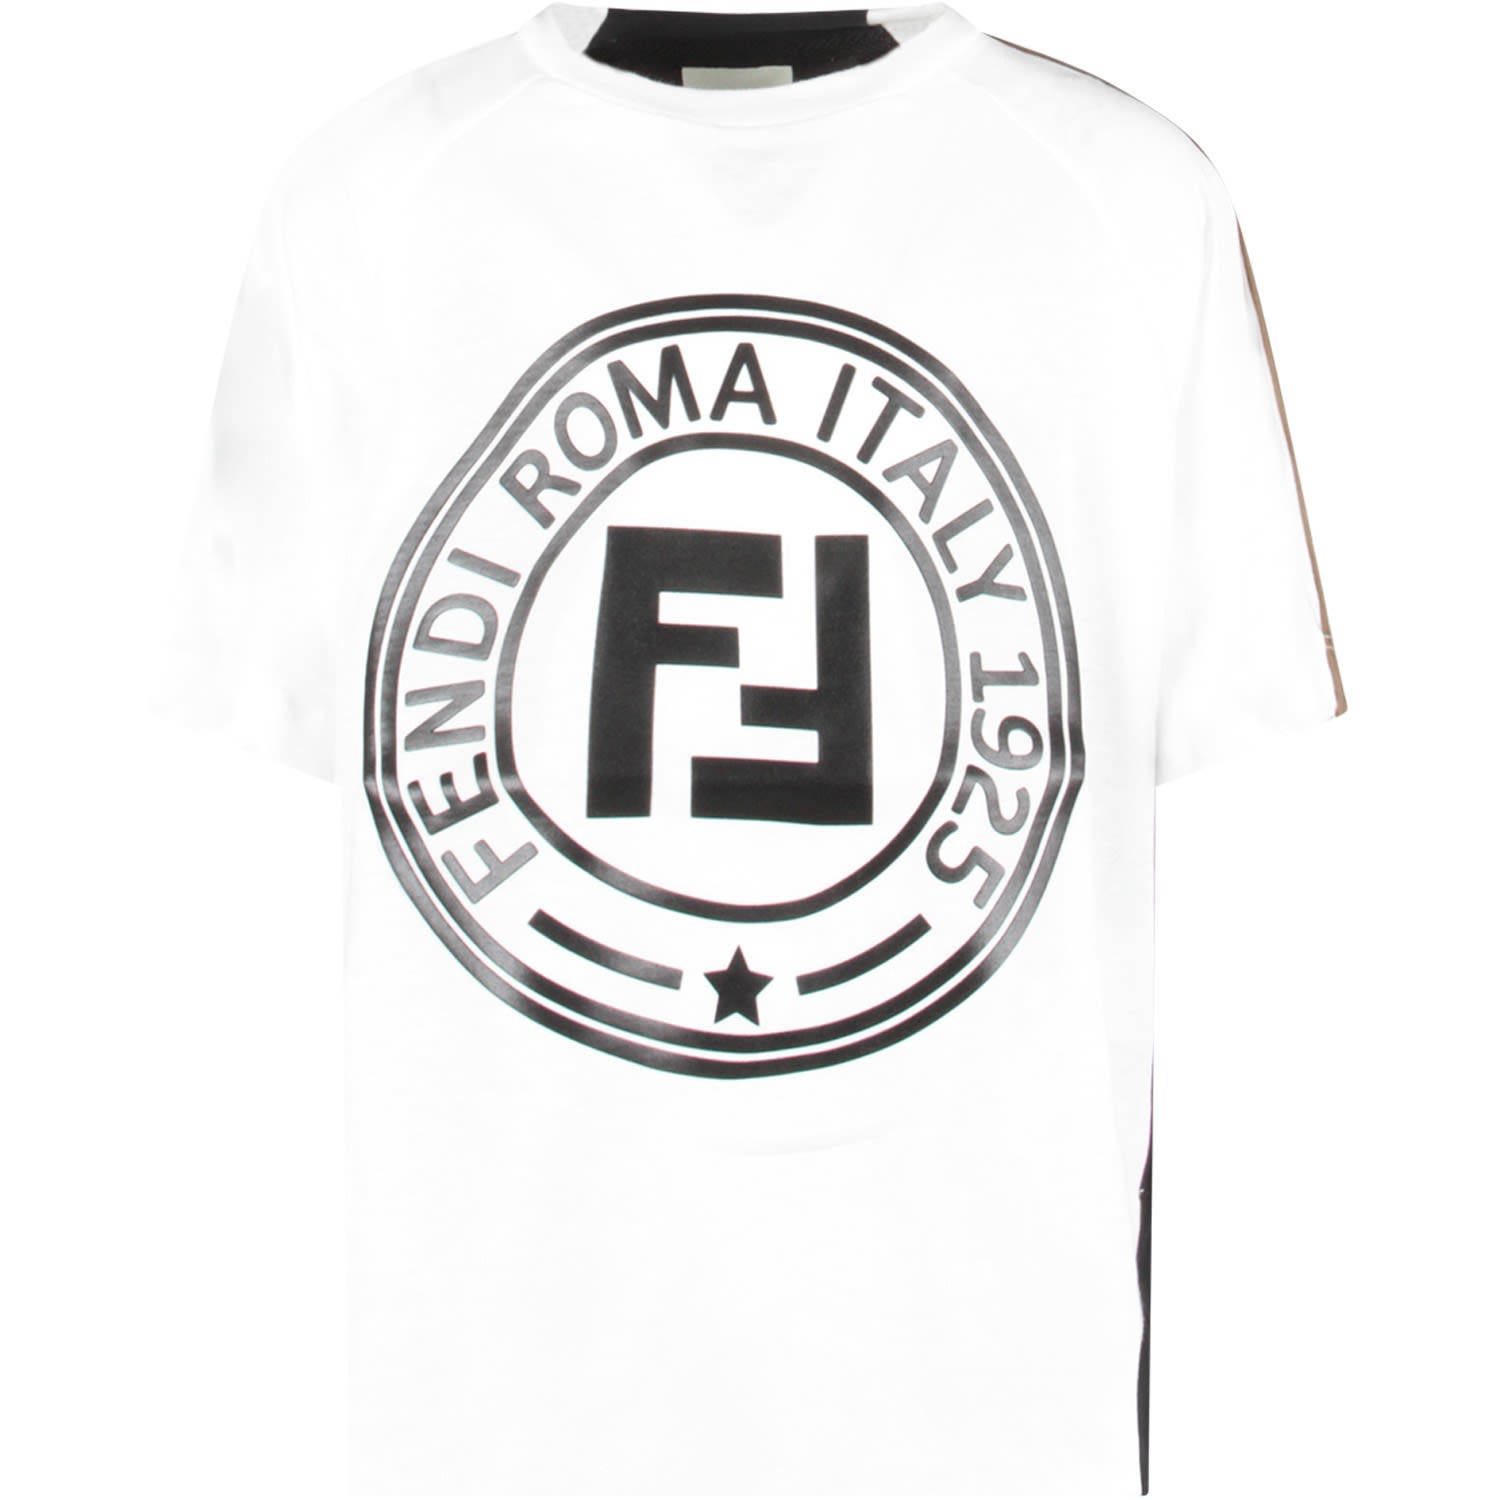 Fendi Kids' White And Black T-shirt With Double Ff For Boy